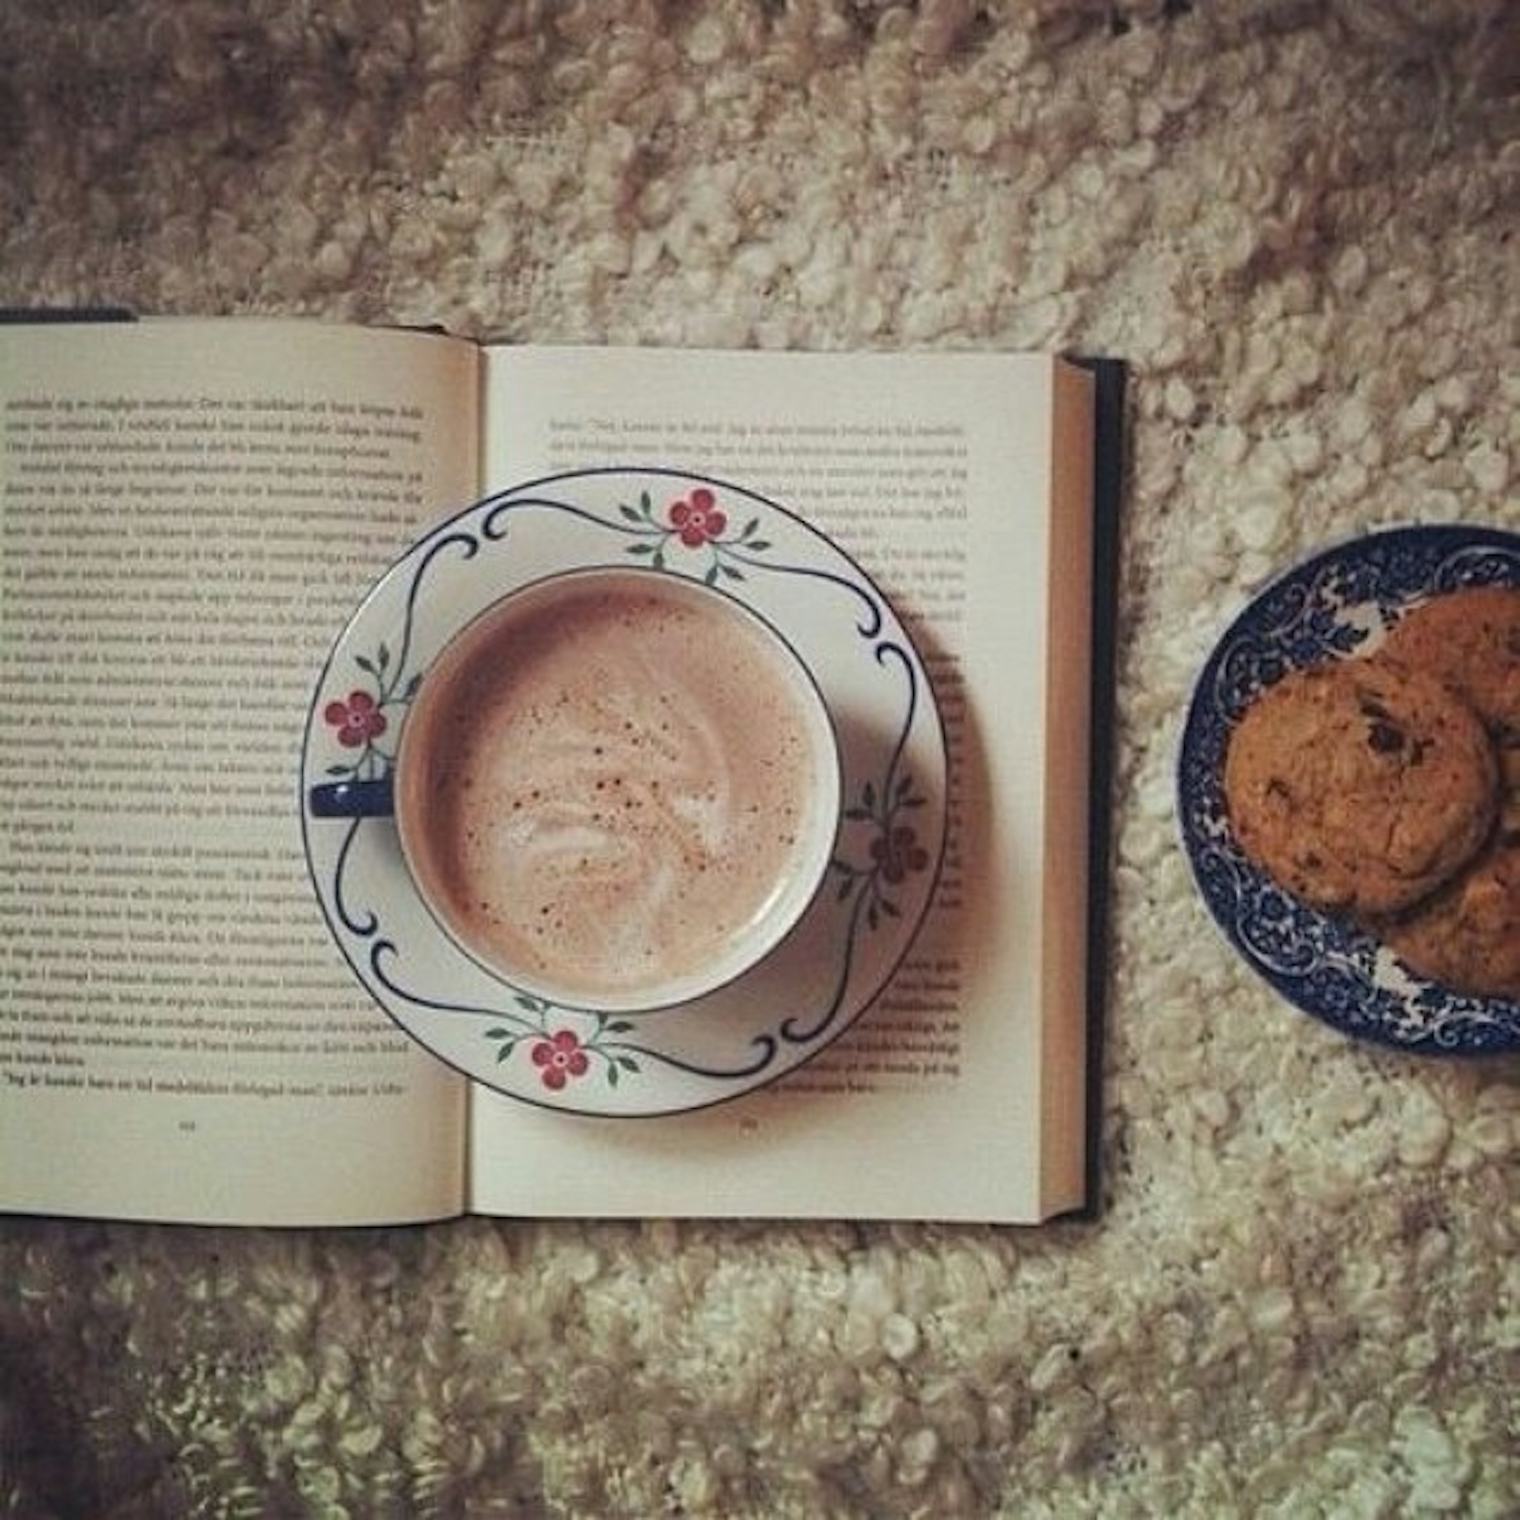 13 Photos That Prove Coffee and Books Were Meant for Each Other